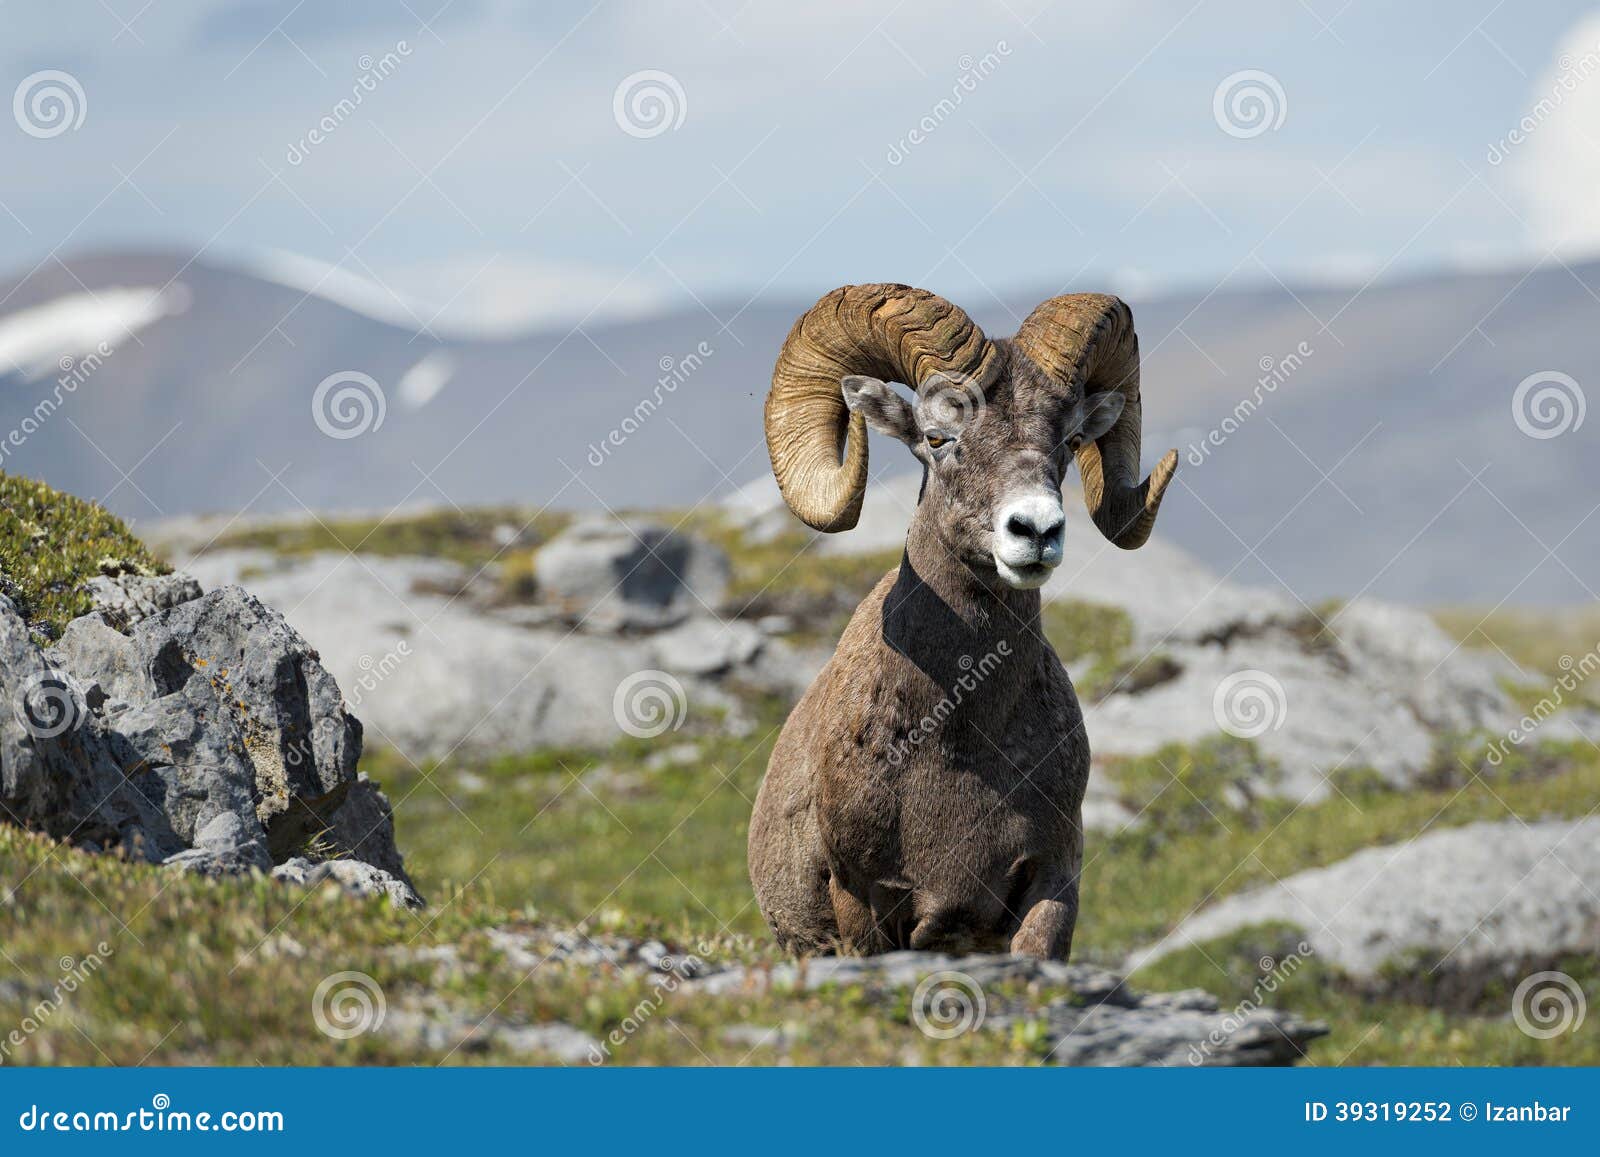 big horn sheep portrait while looking at you